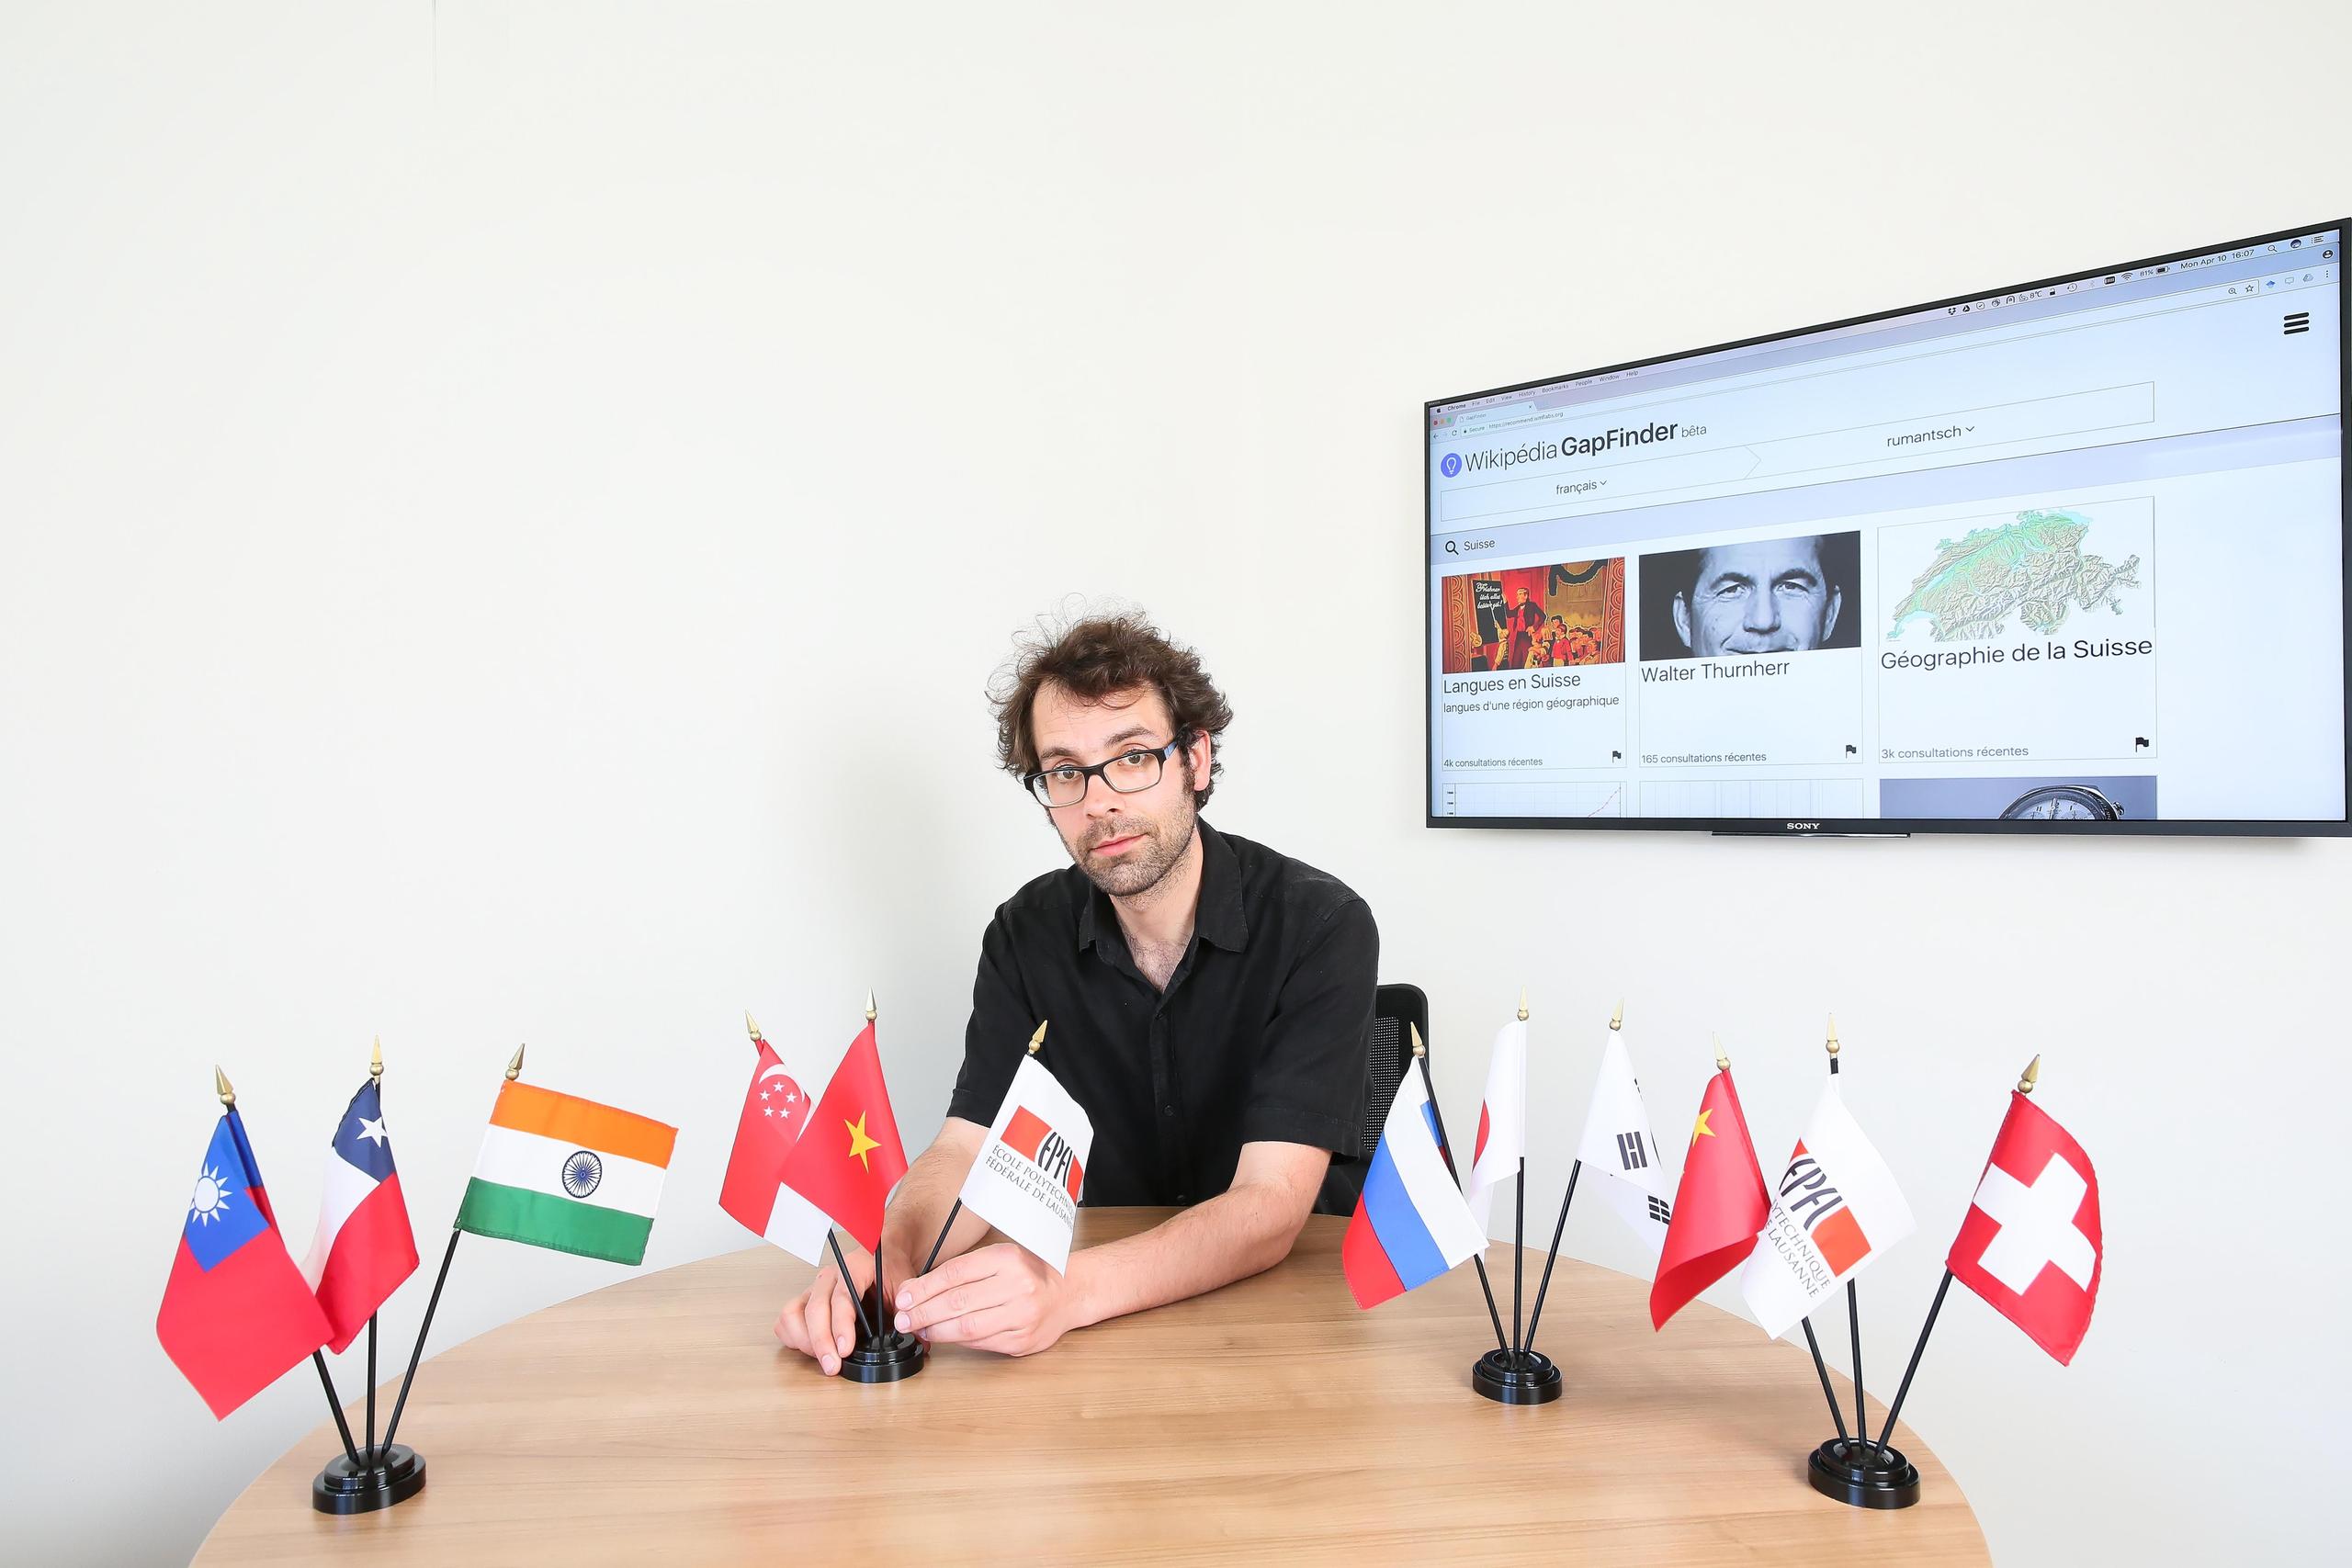 EPFL researcher Robert West poses with national flags in front of a screen showing the home page of Wikipedia GapFinder platform